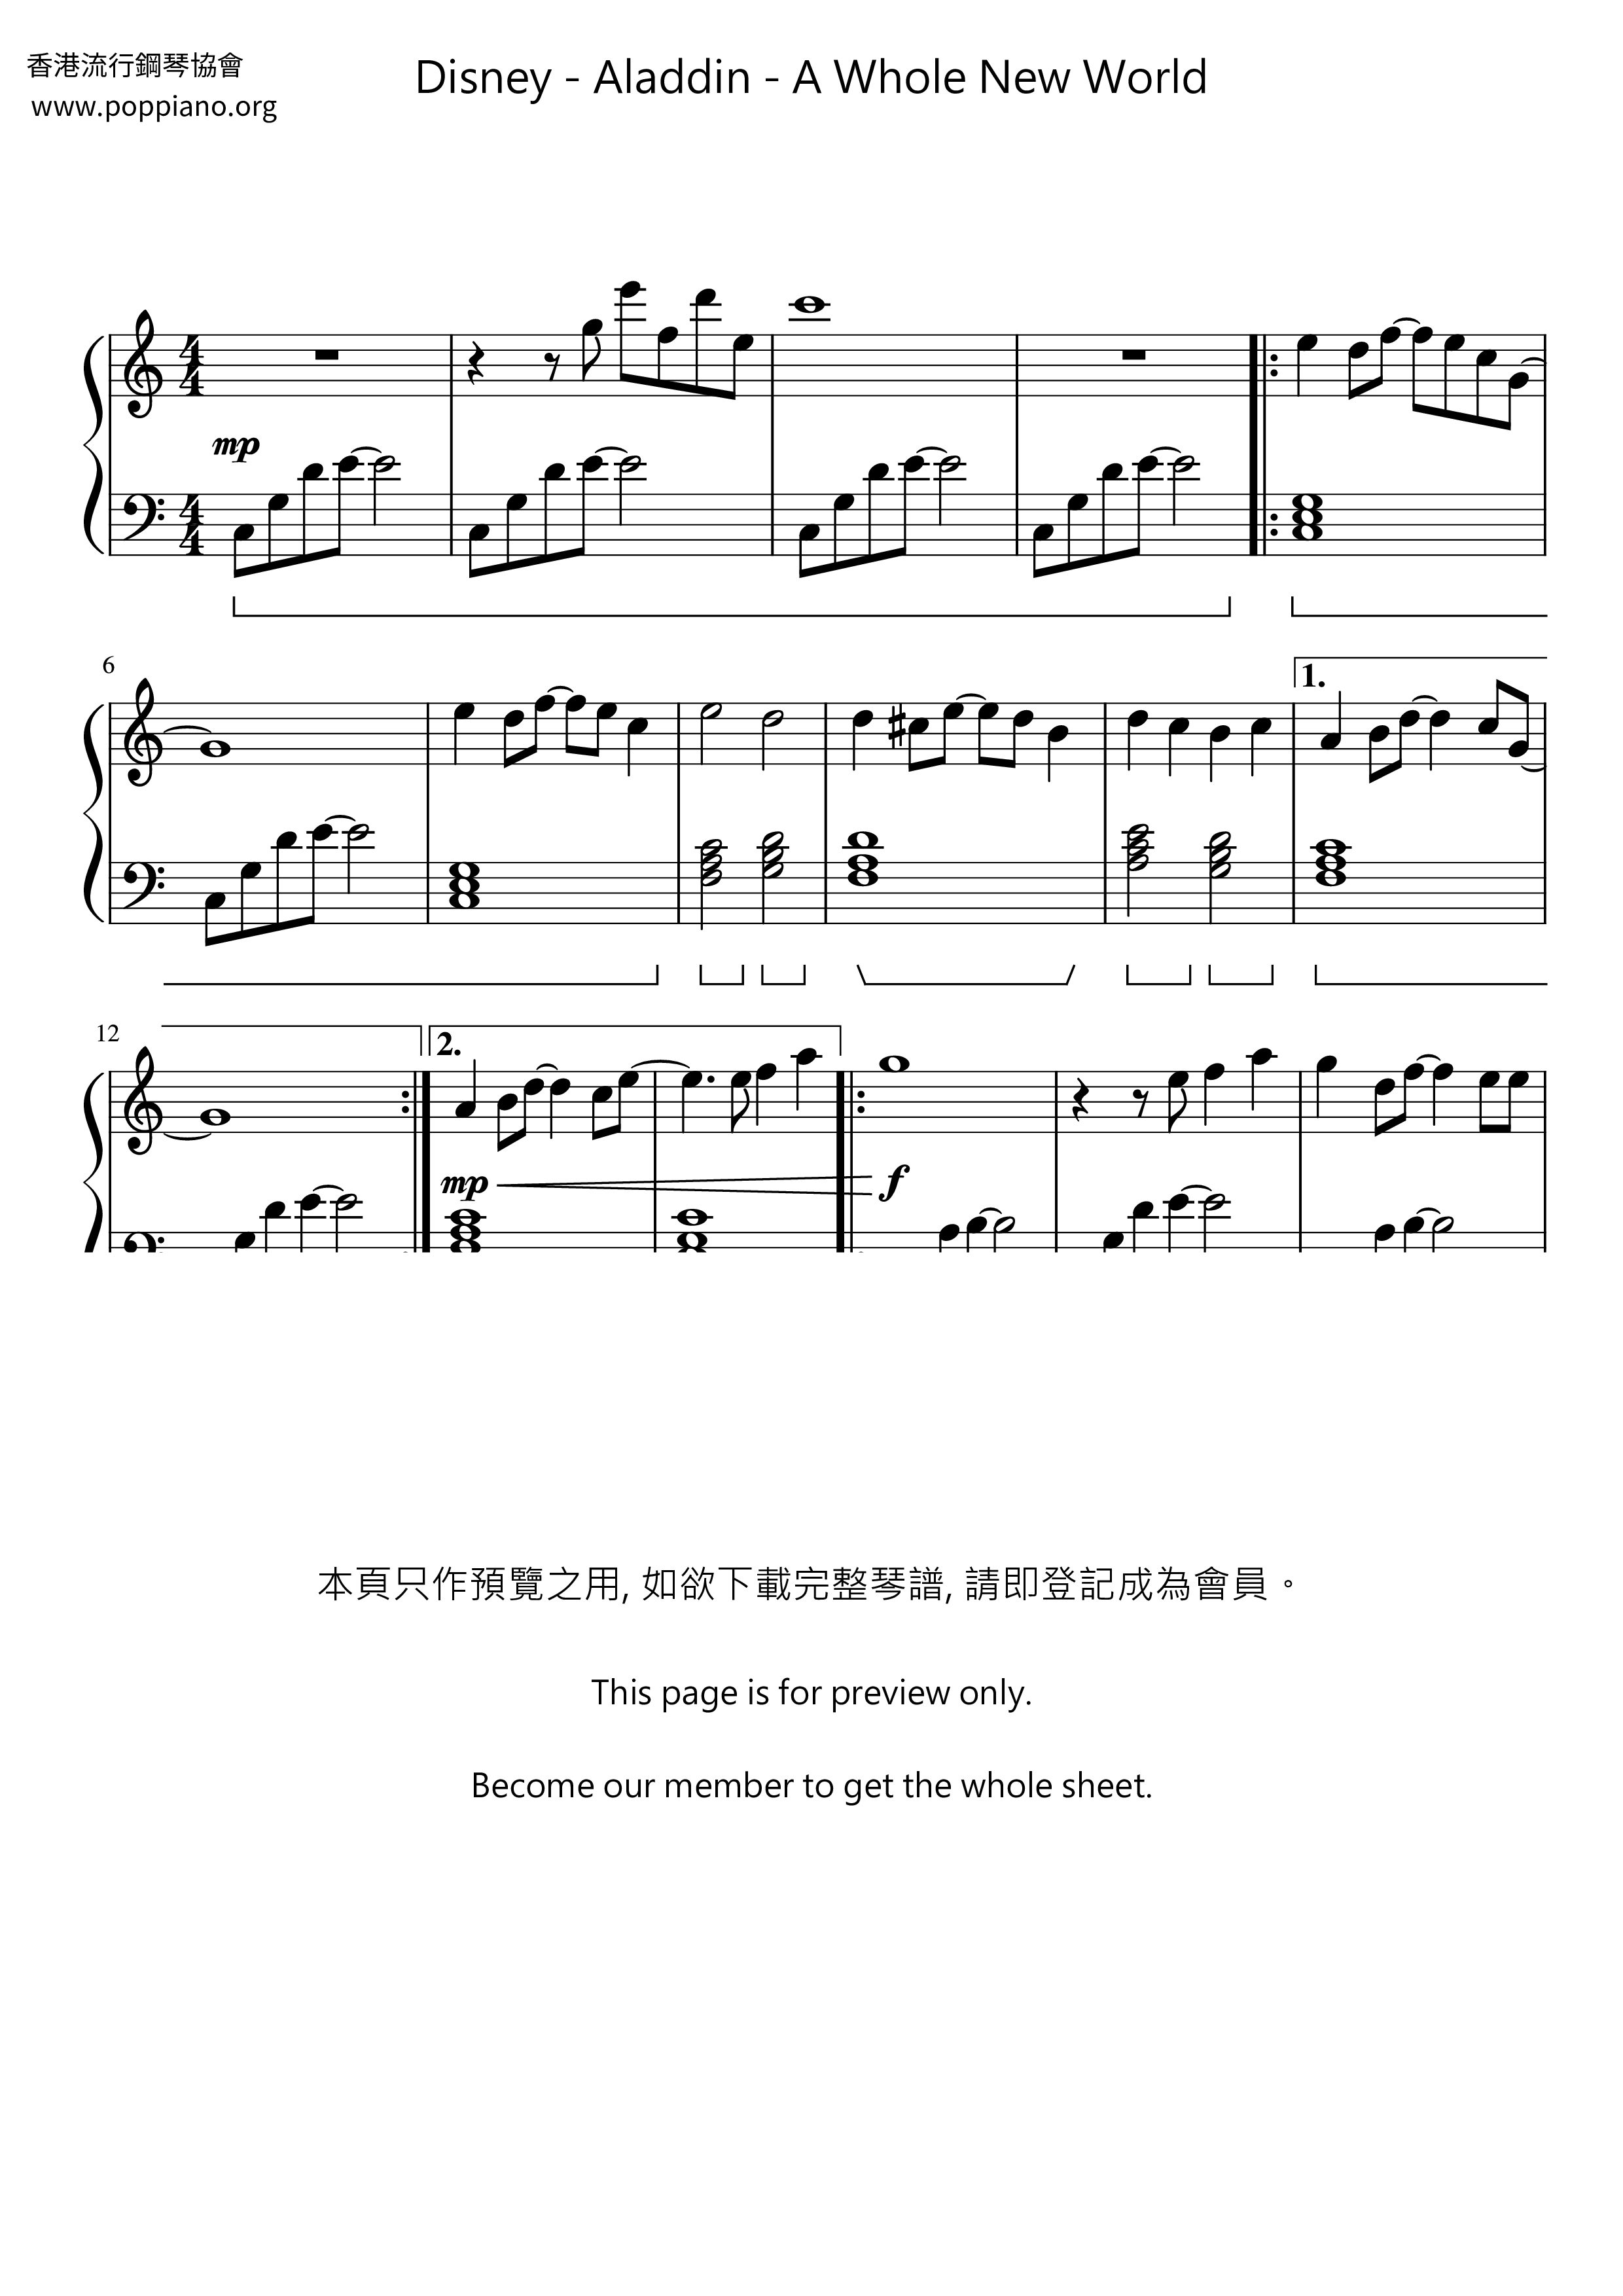 A Whole New World (End Title) - From Aladdin琴譜